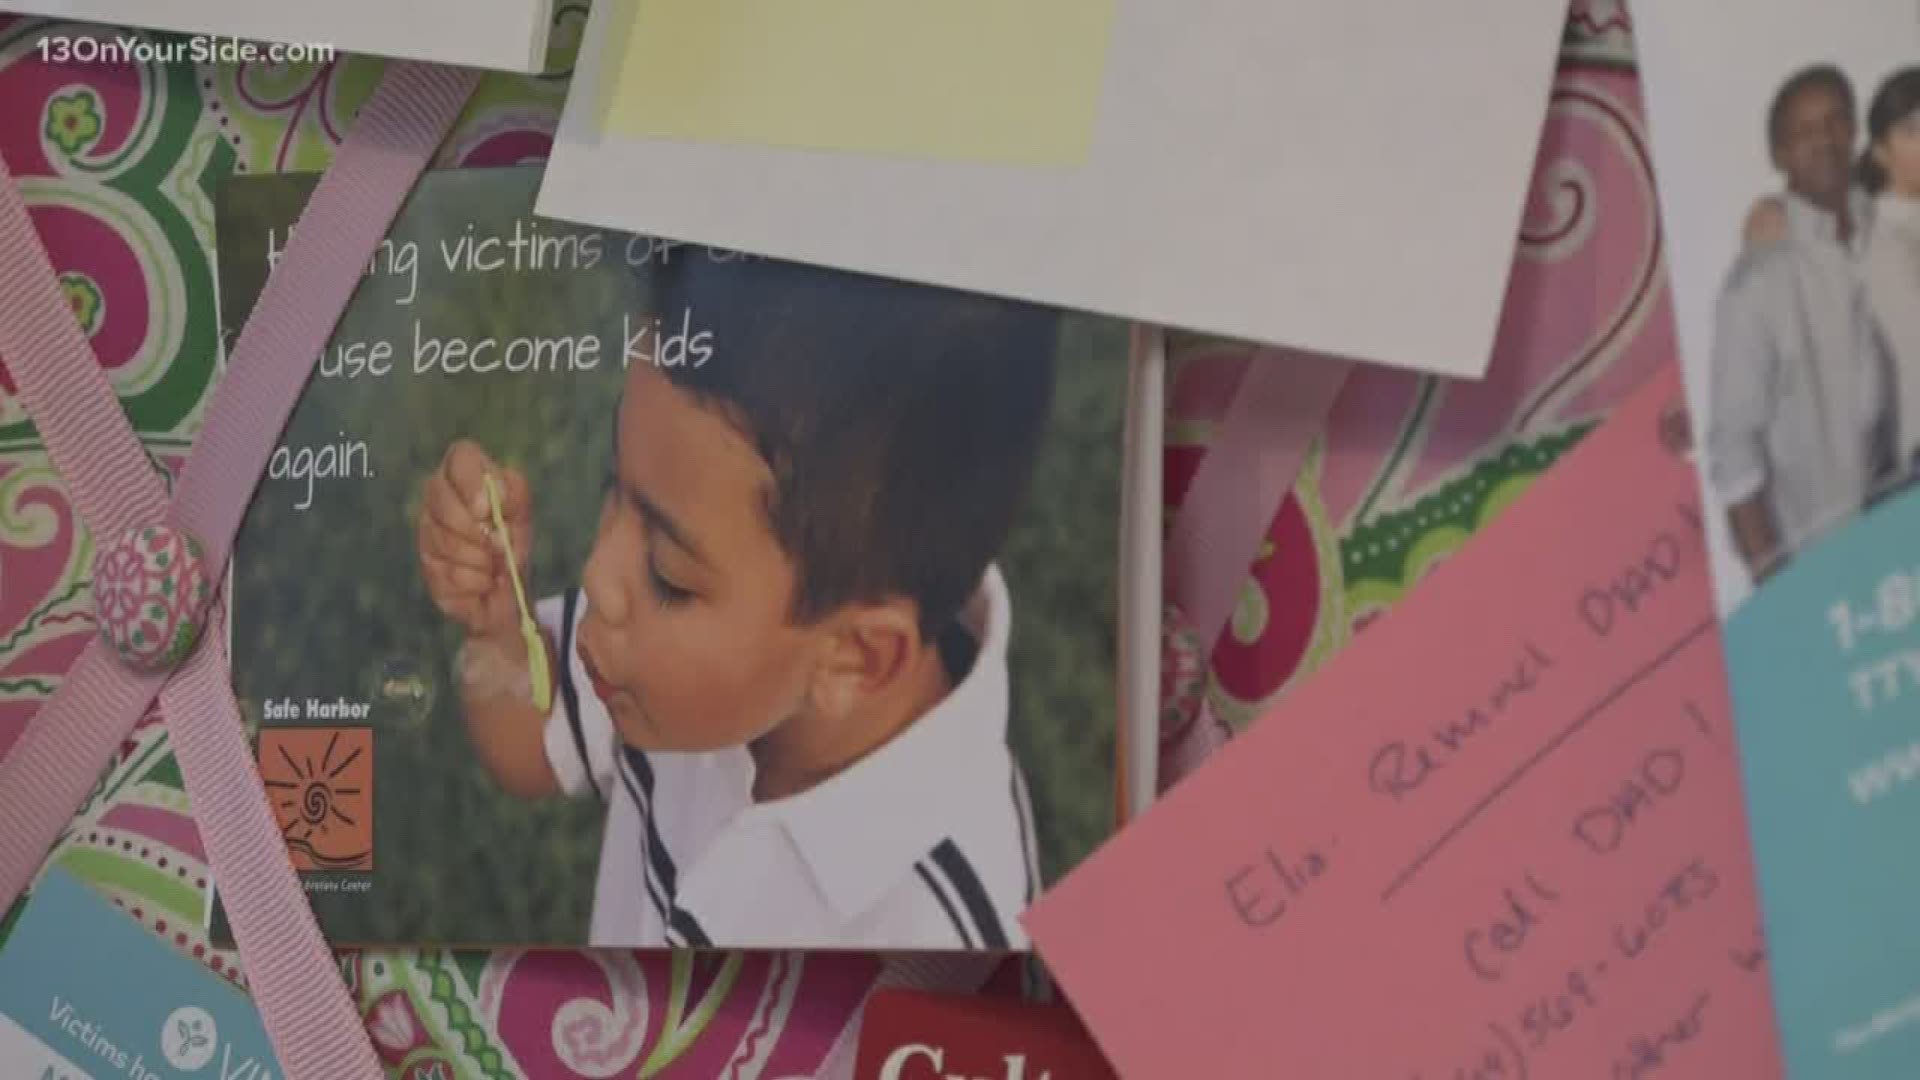 Safe Harbor Children's Advocacy center interviews children who are victims of abuse.